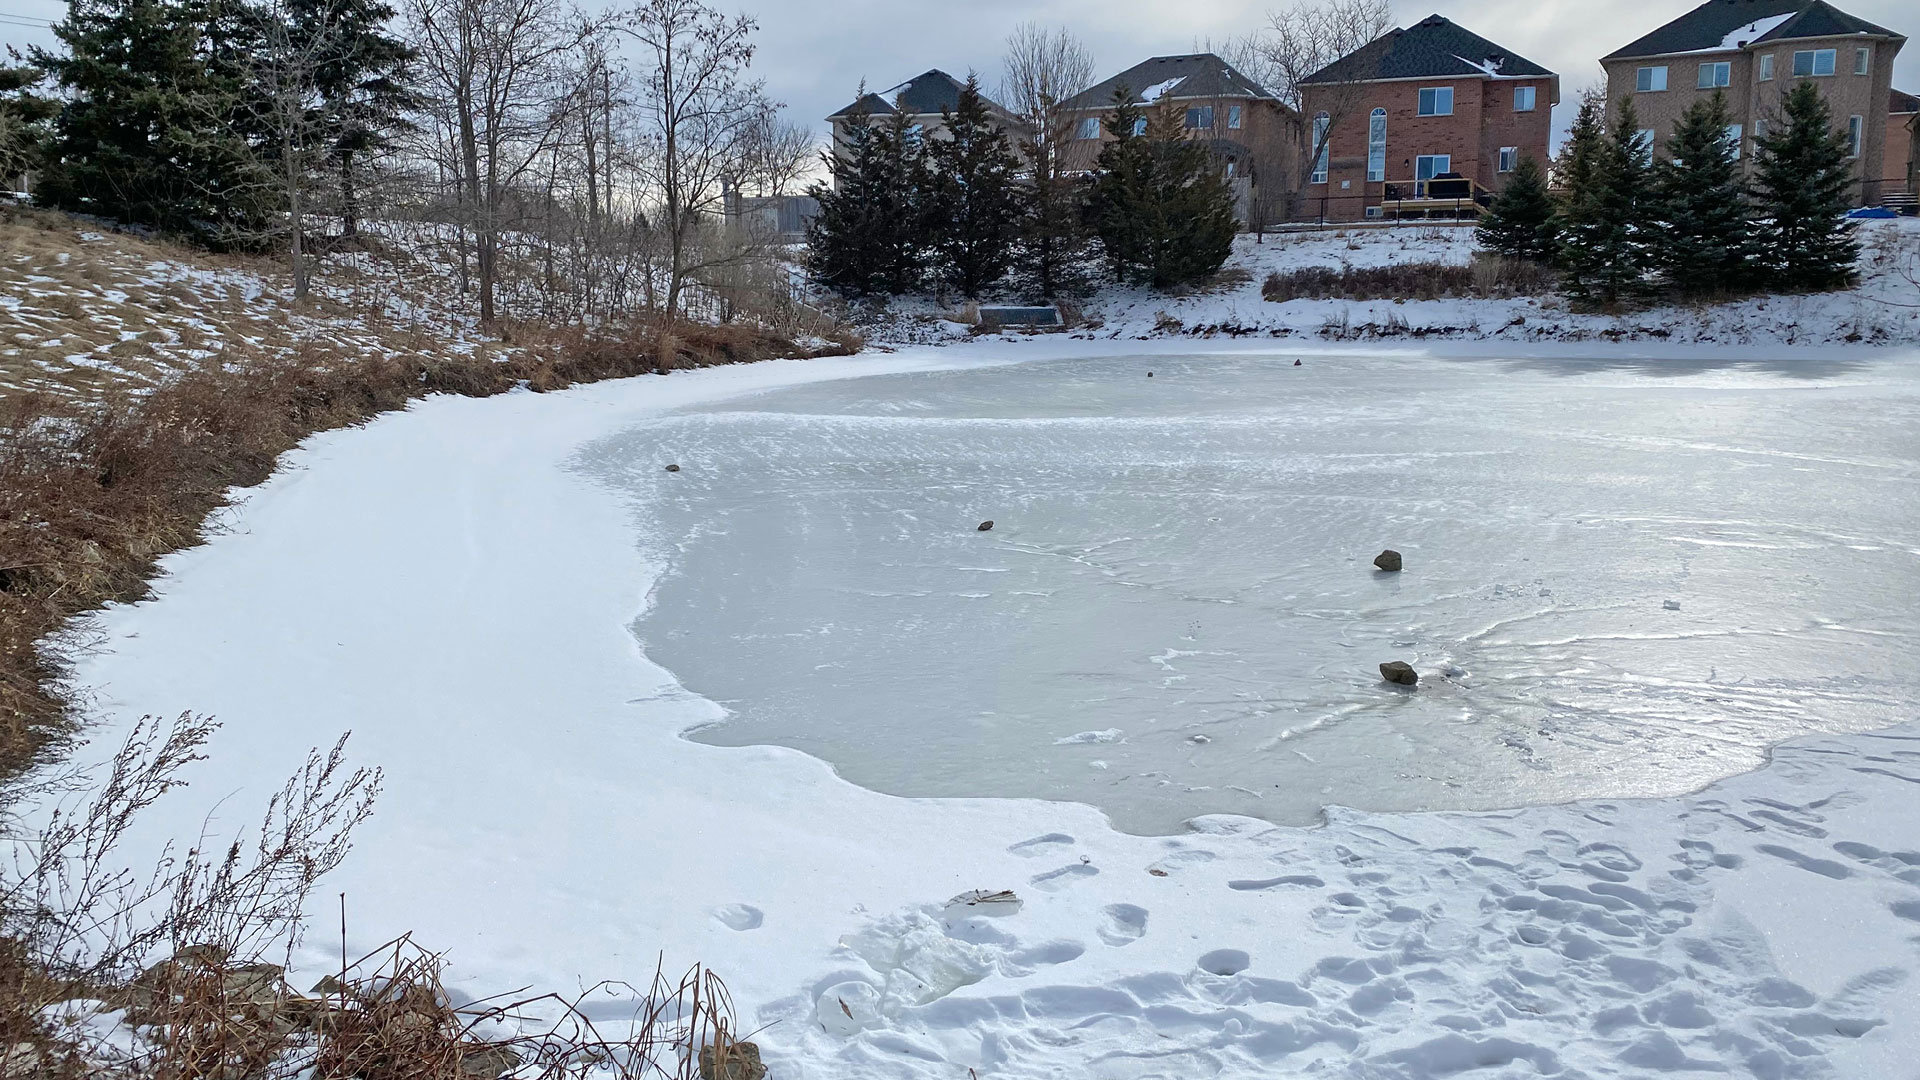 Frozen stormwater pond with snow on top